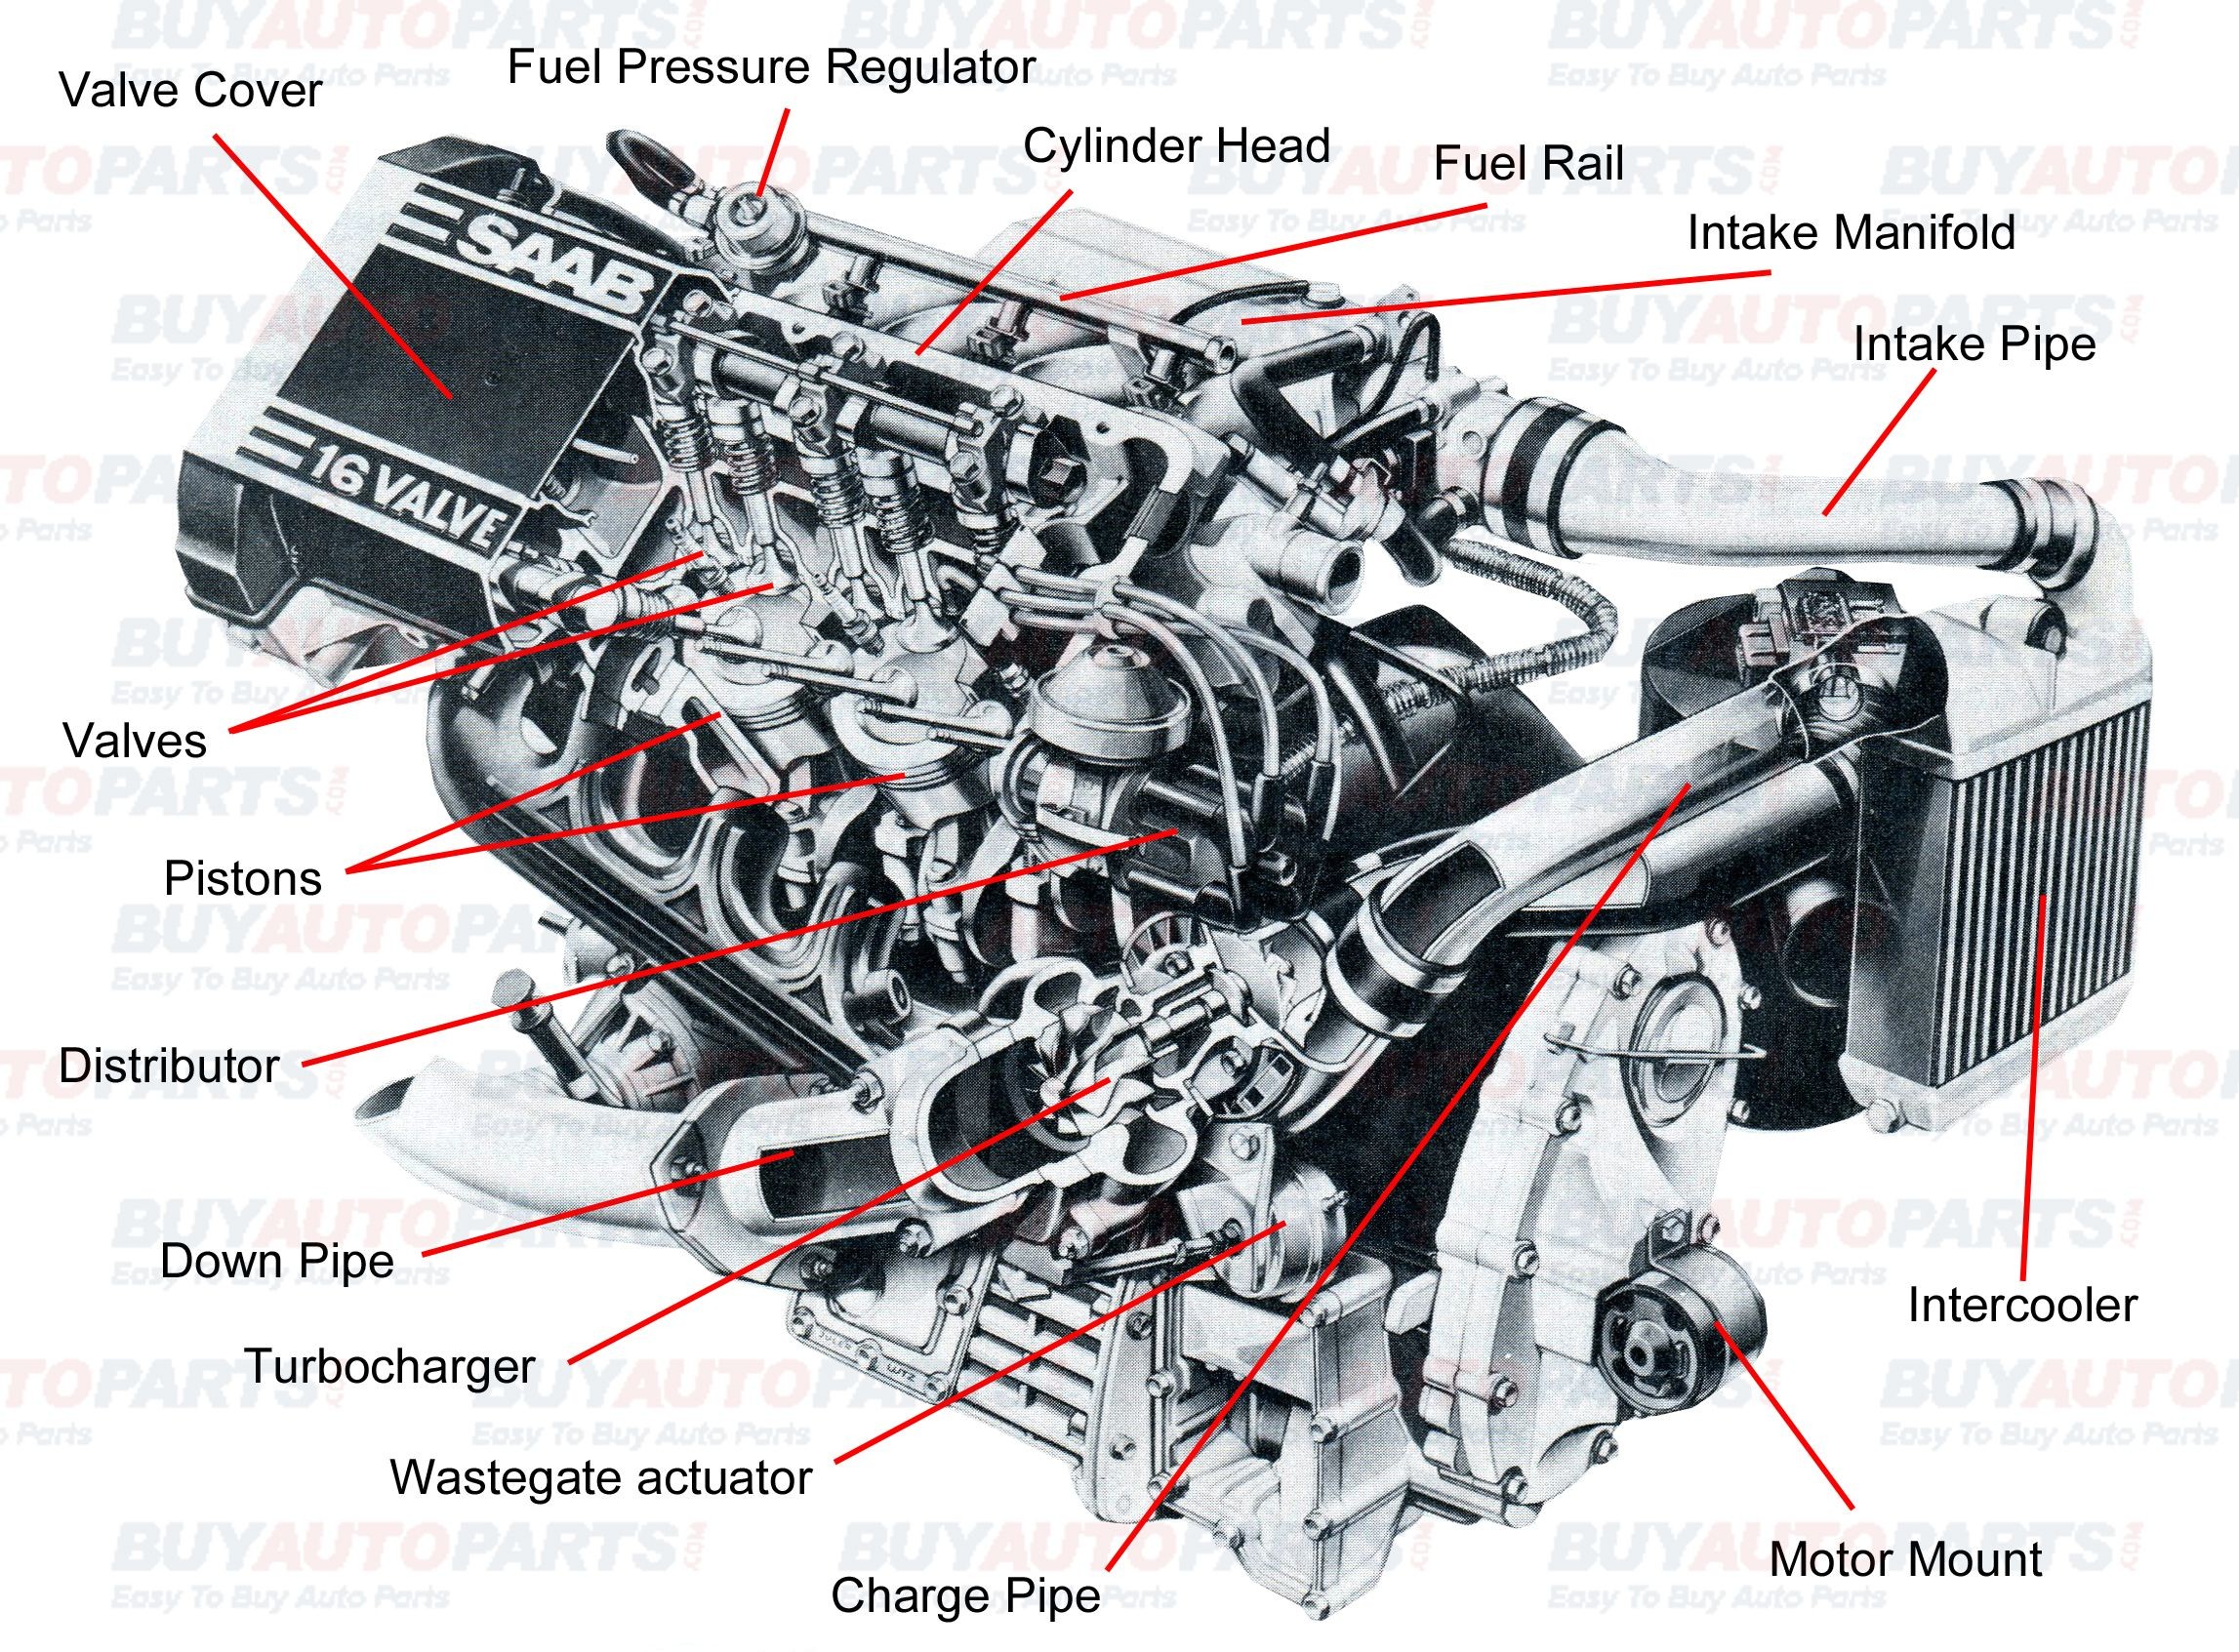 Diagram Of Car Parts Under the Hood Pin by Jimmiejanet Testellamwfz On What Does An Engine with Turbo